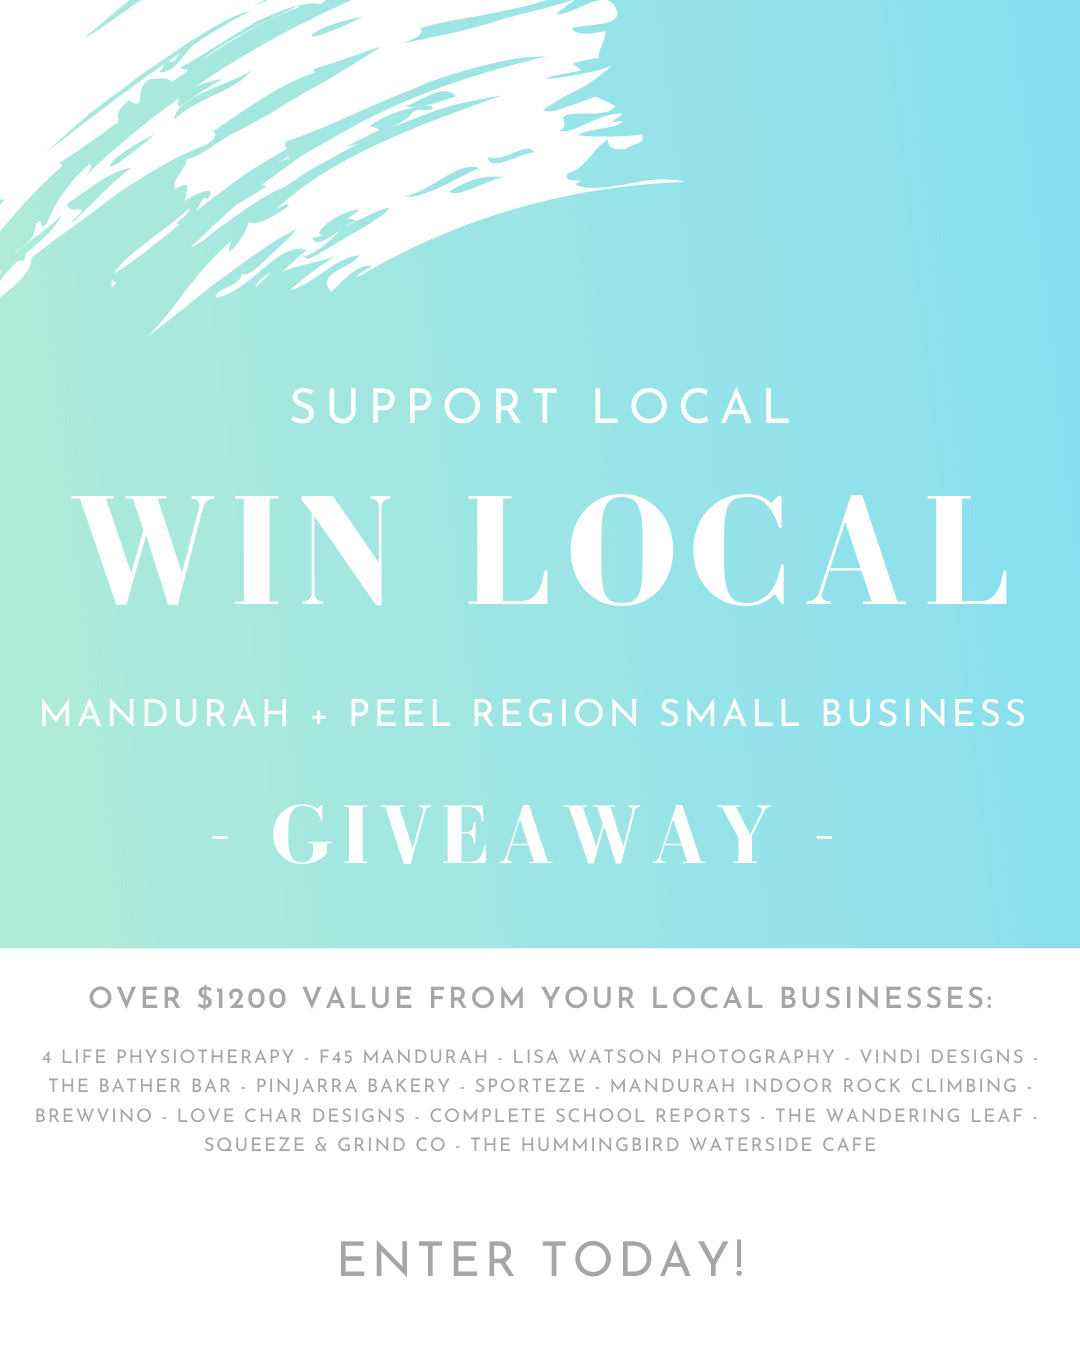 Lisa Watson Photography Mandurah Photographer - Support Local Win Local giveaway competition small business